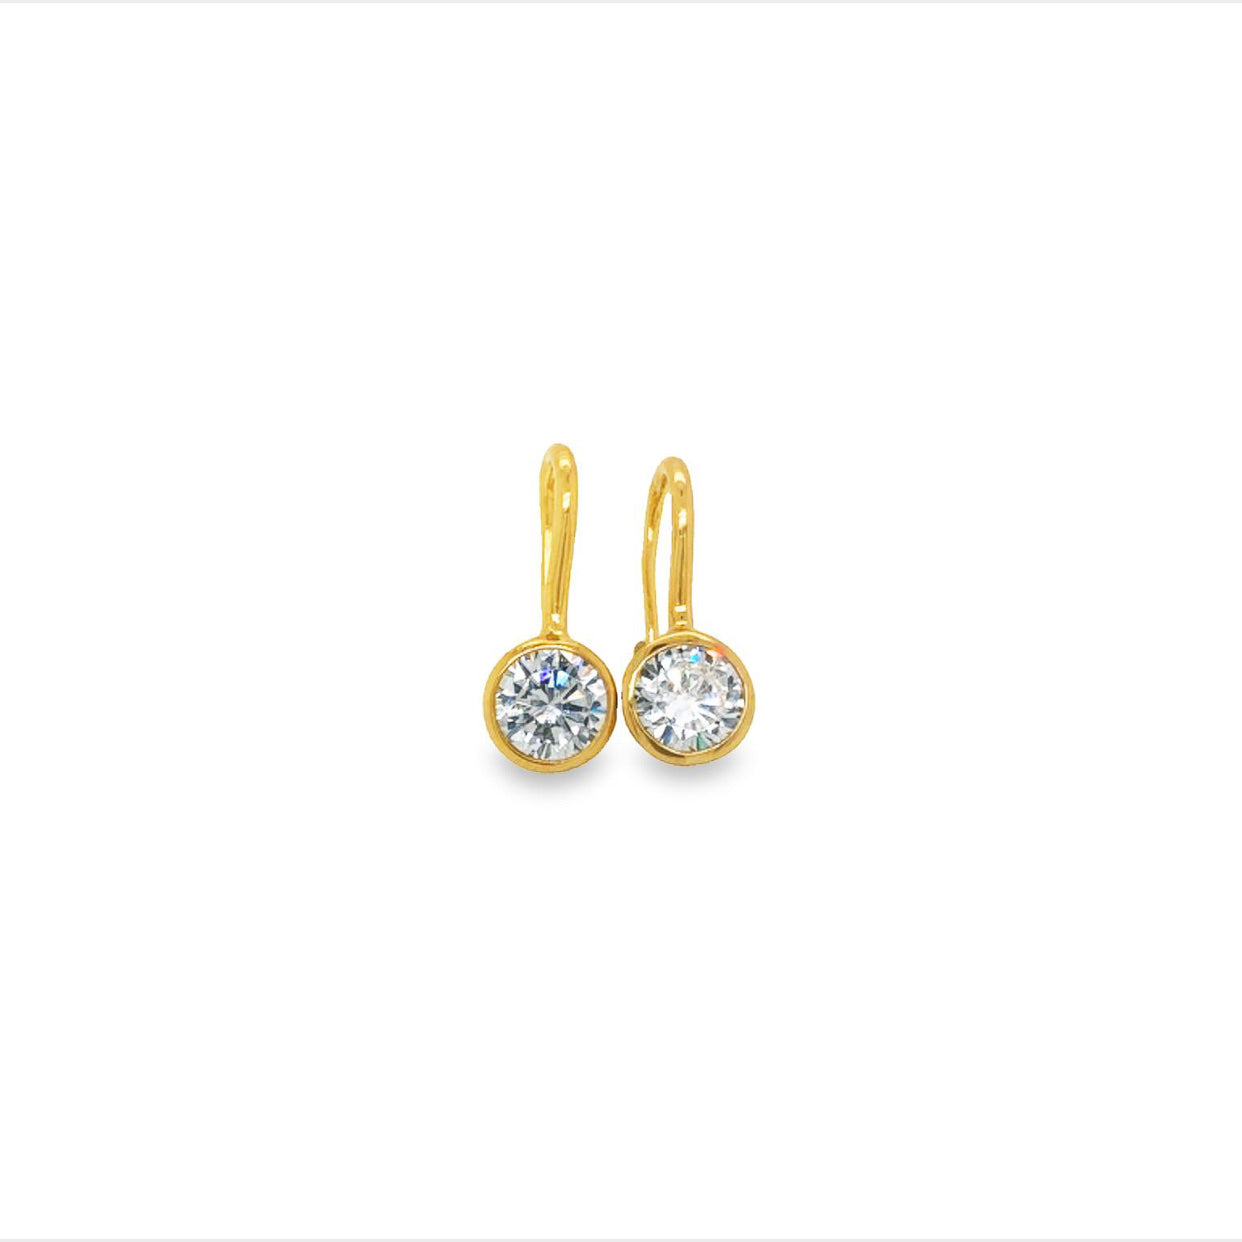 Silver Gold Plated Cz Set Fixed Hook Earrings